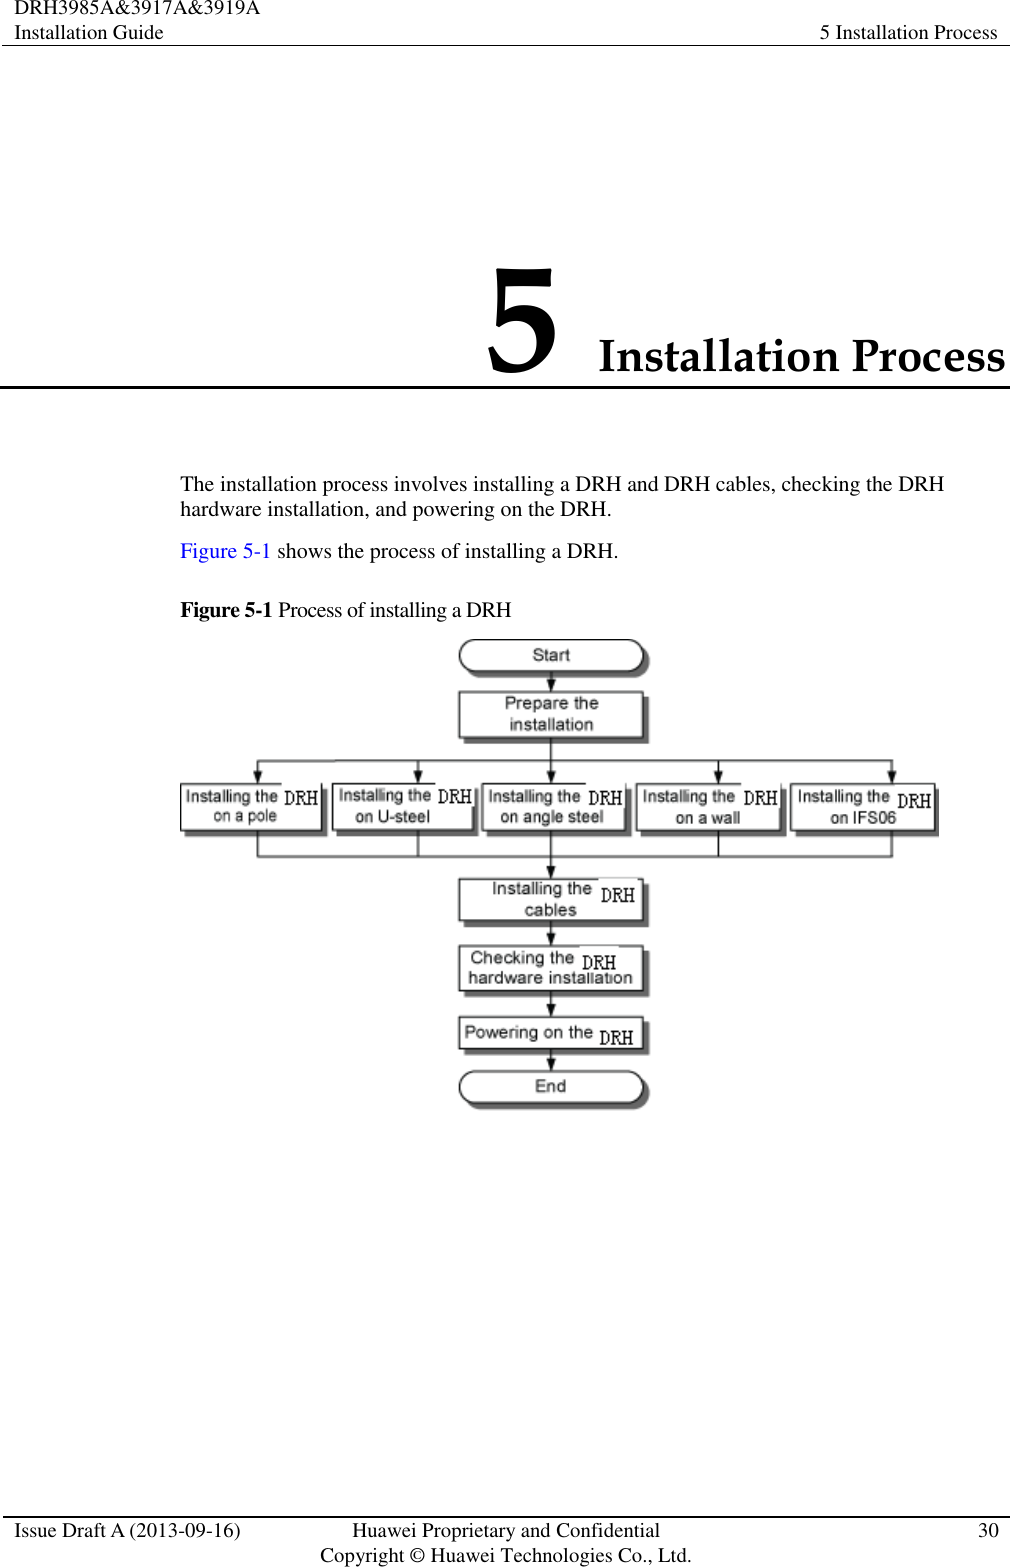 DRH3985A&amp;3917A&amp;3919A Installation Guide 5 Installation Process  Issue Draft A (2013-09-16) Huawei Proprietary and Confidential                                     Copyright © Huawei Technologies Co., Ltd. 30  5 Installation Process The installation process involves installing a DRH and DRH cables, checking the DRH hardware installation, and powering on the DRH. Figure 5-1 shows the process of installing a DRH. Figure 5-1 Process of installing a DRH   